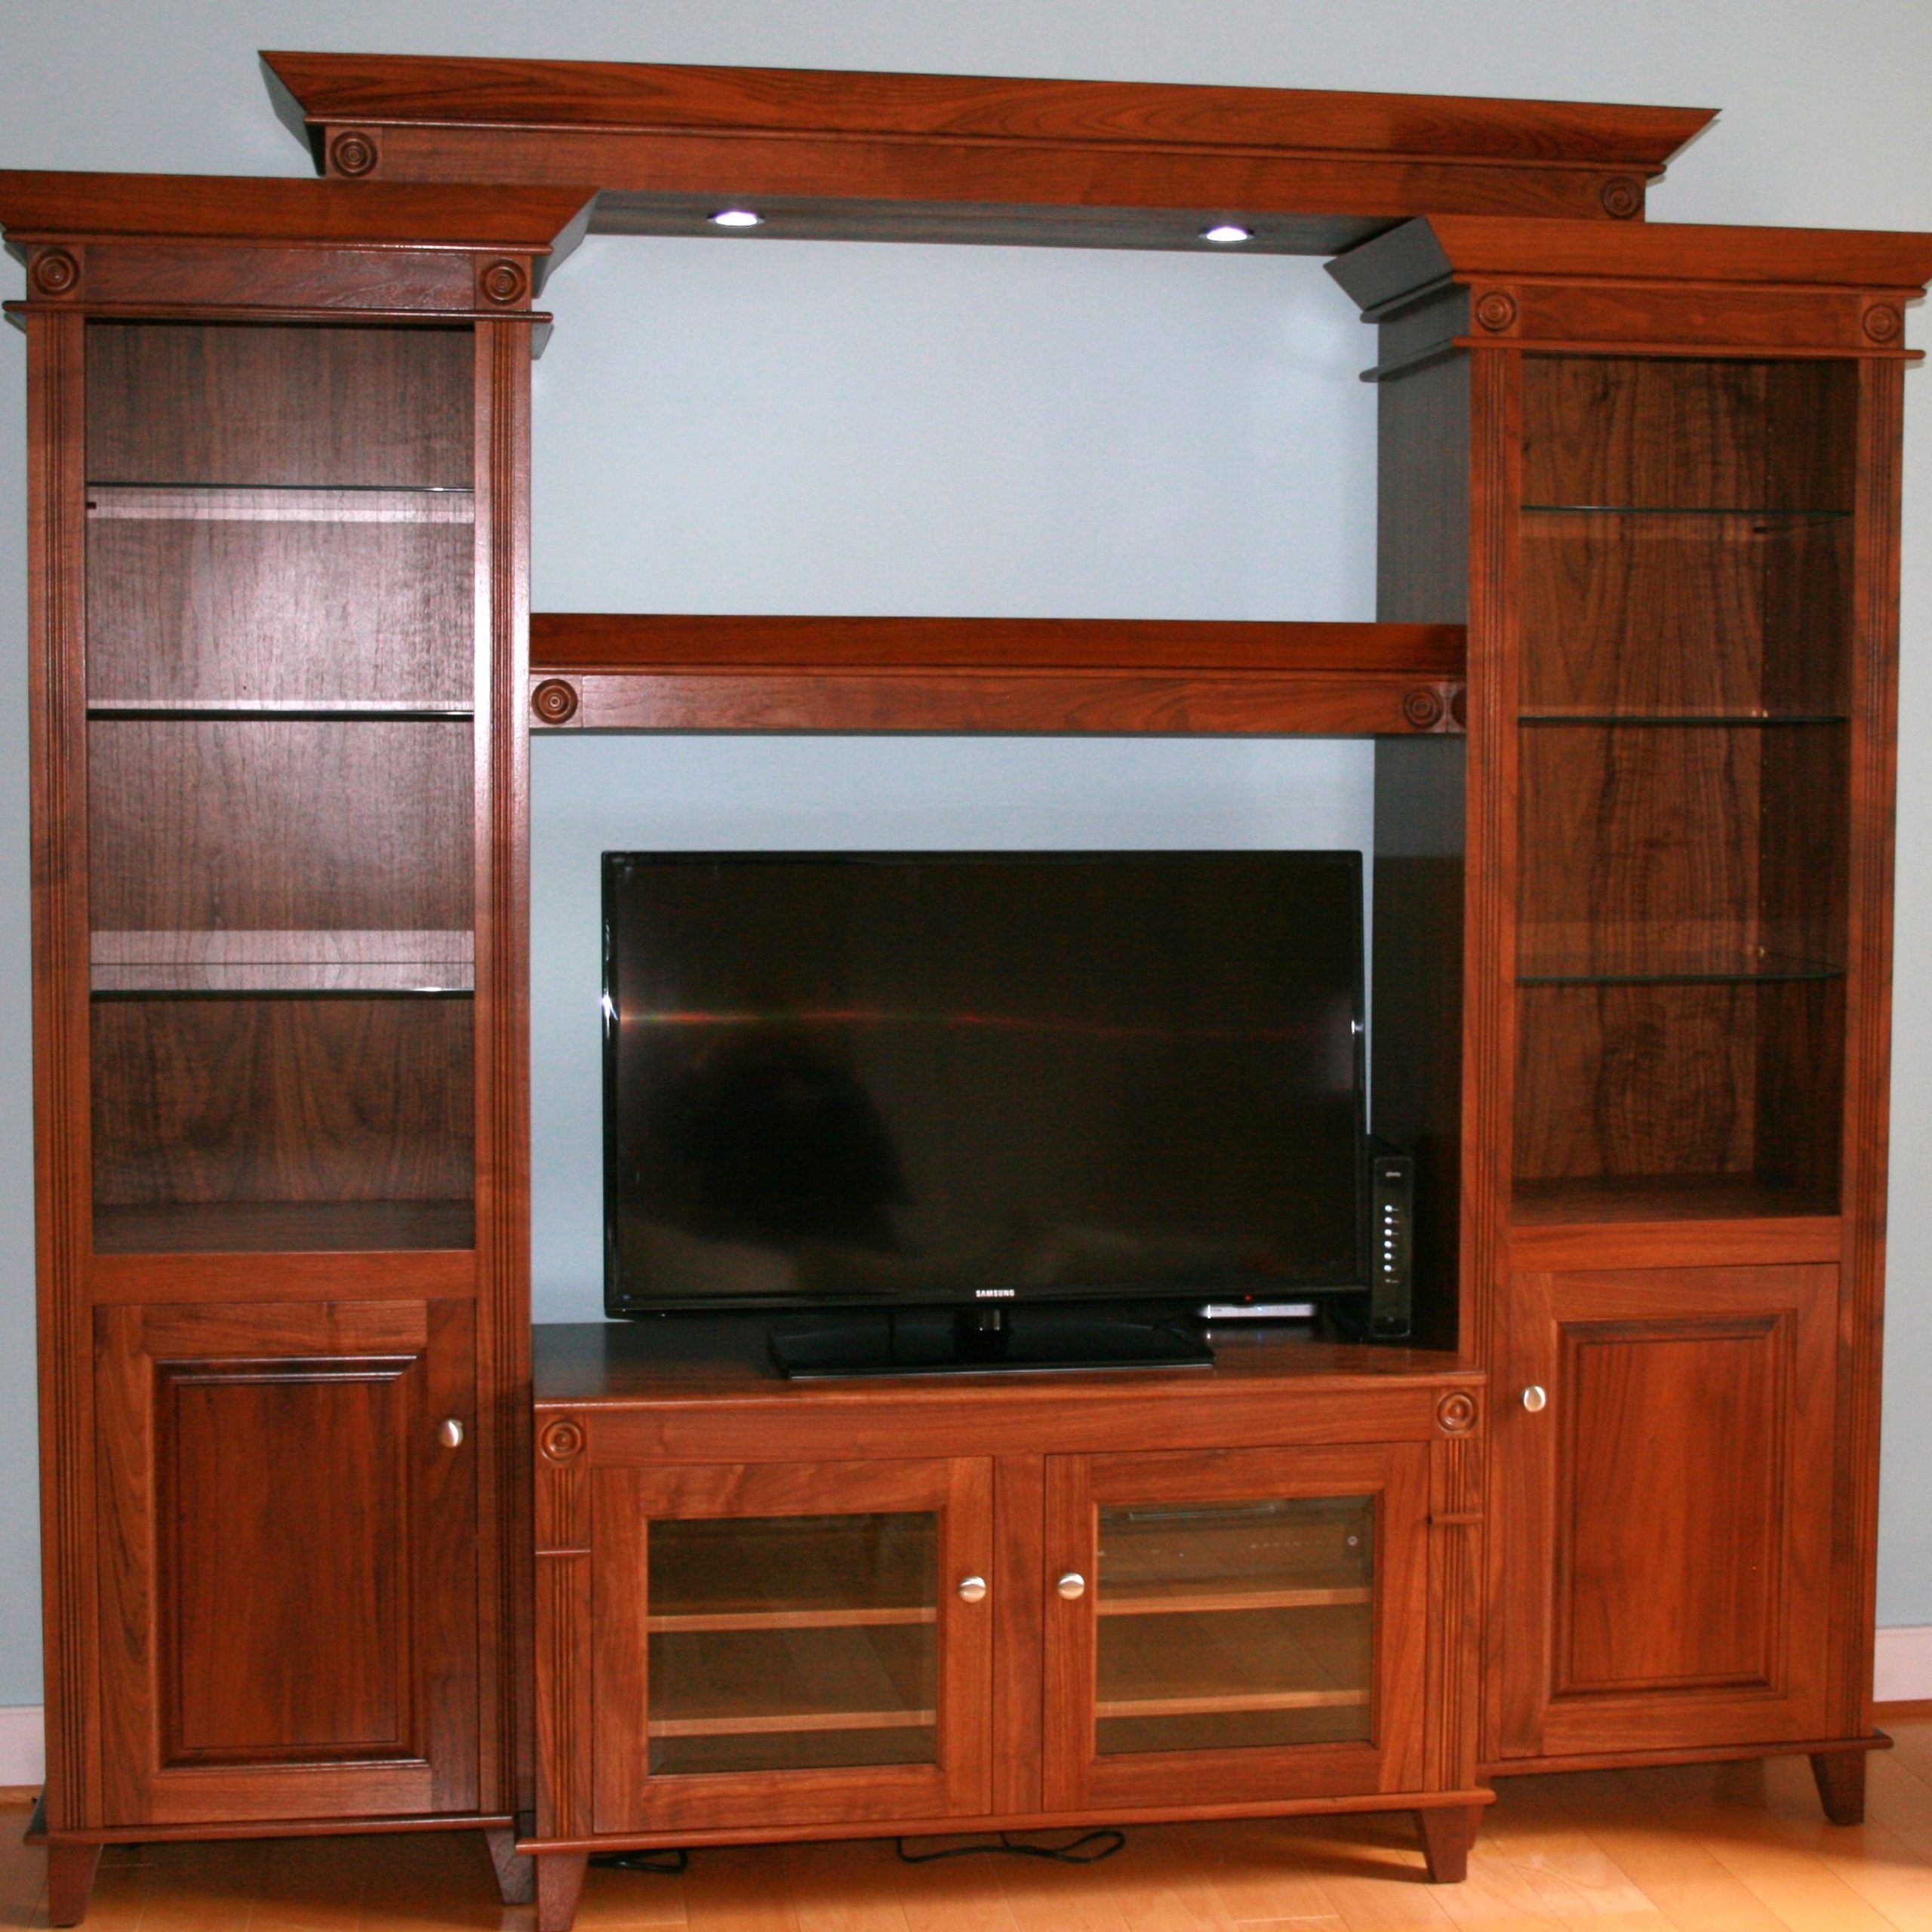 Solid Walnut Entertainment Center Intended For Walnut Entertainment Centers (View 8 of 20)